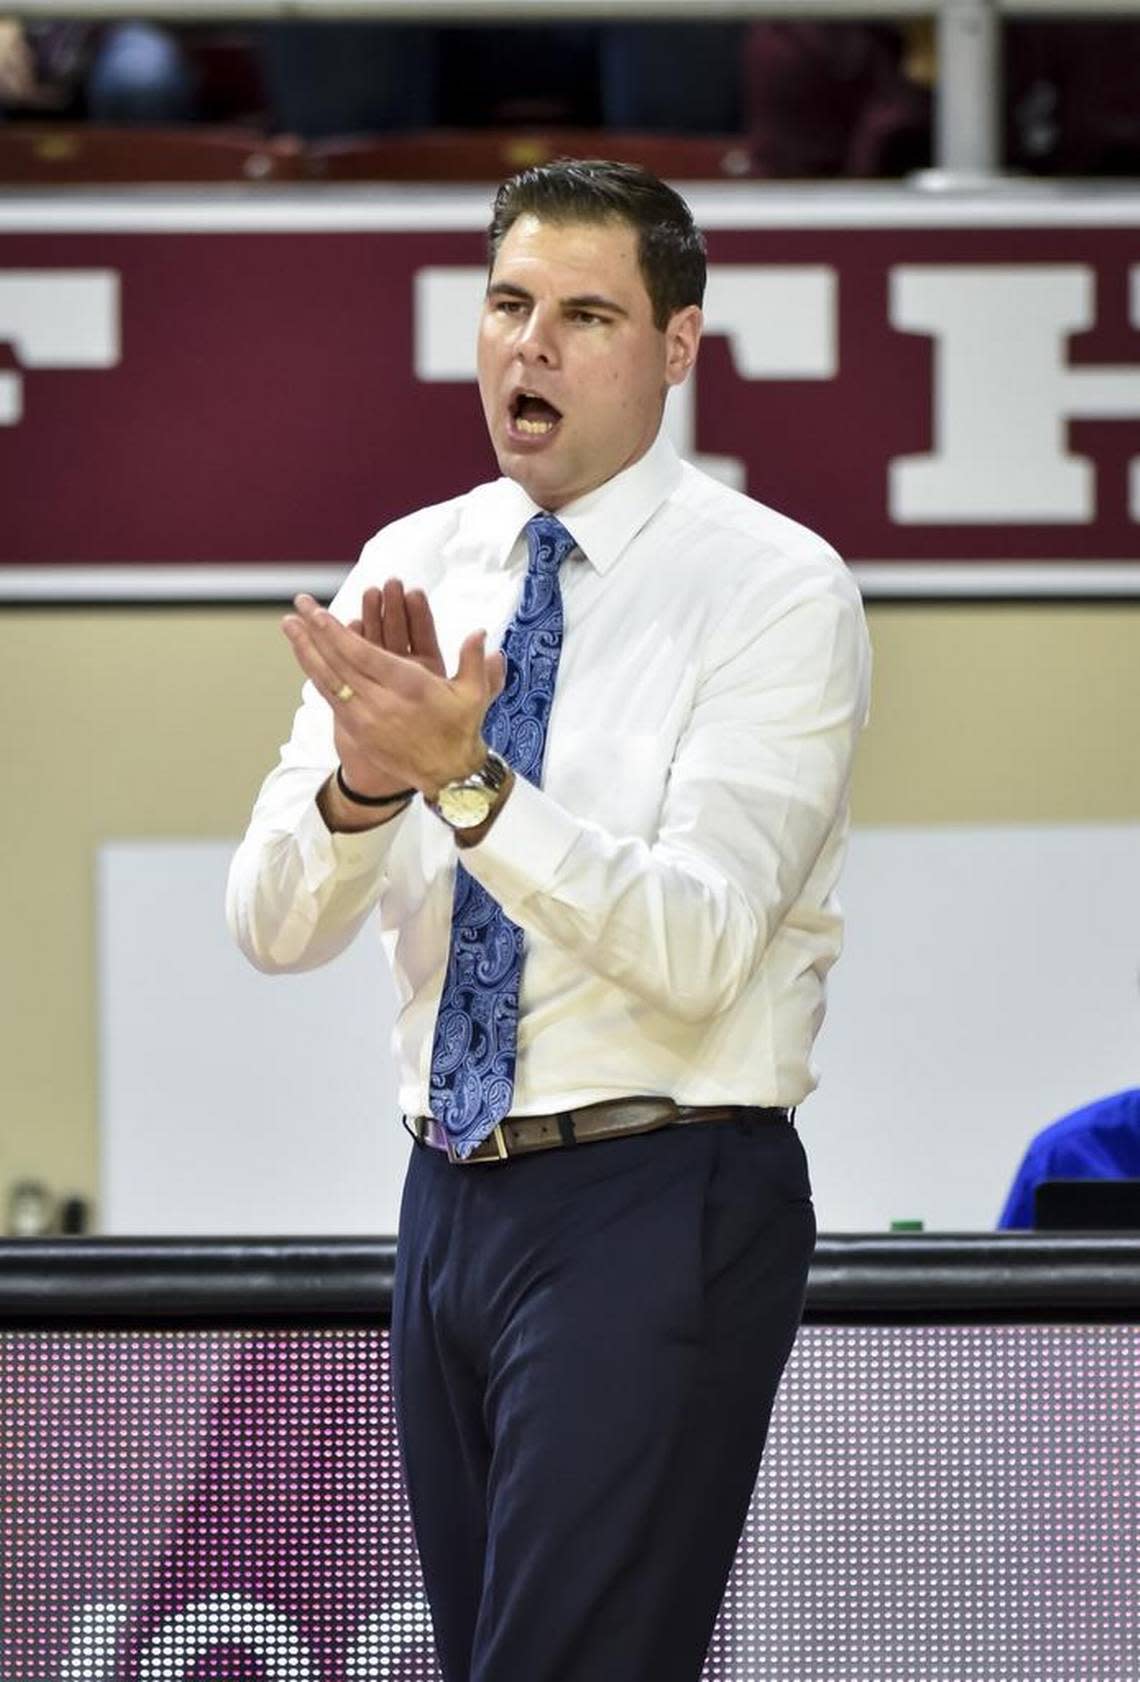 Morehead State and Coach Preston Spradlin have not faced Eastern Kentucky since the Colonels left the OVC for the ASUN for the 2021-22 school year.